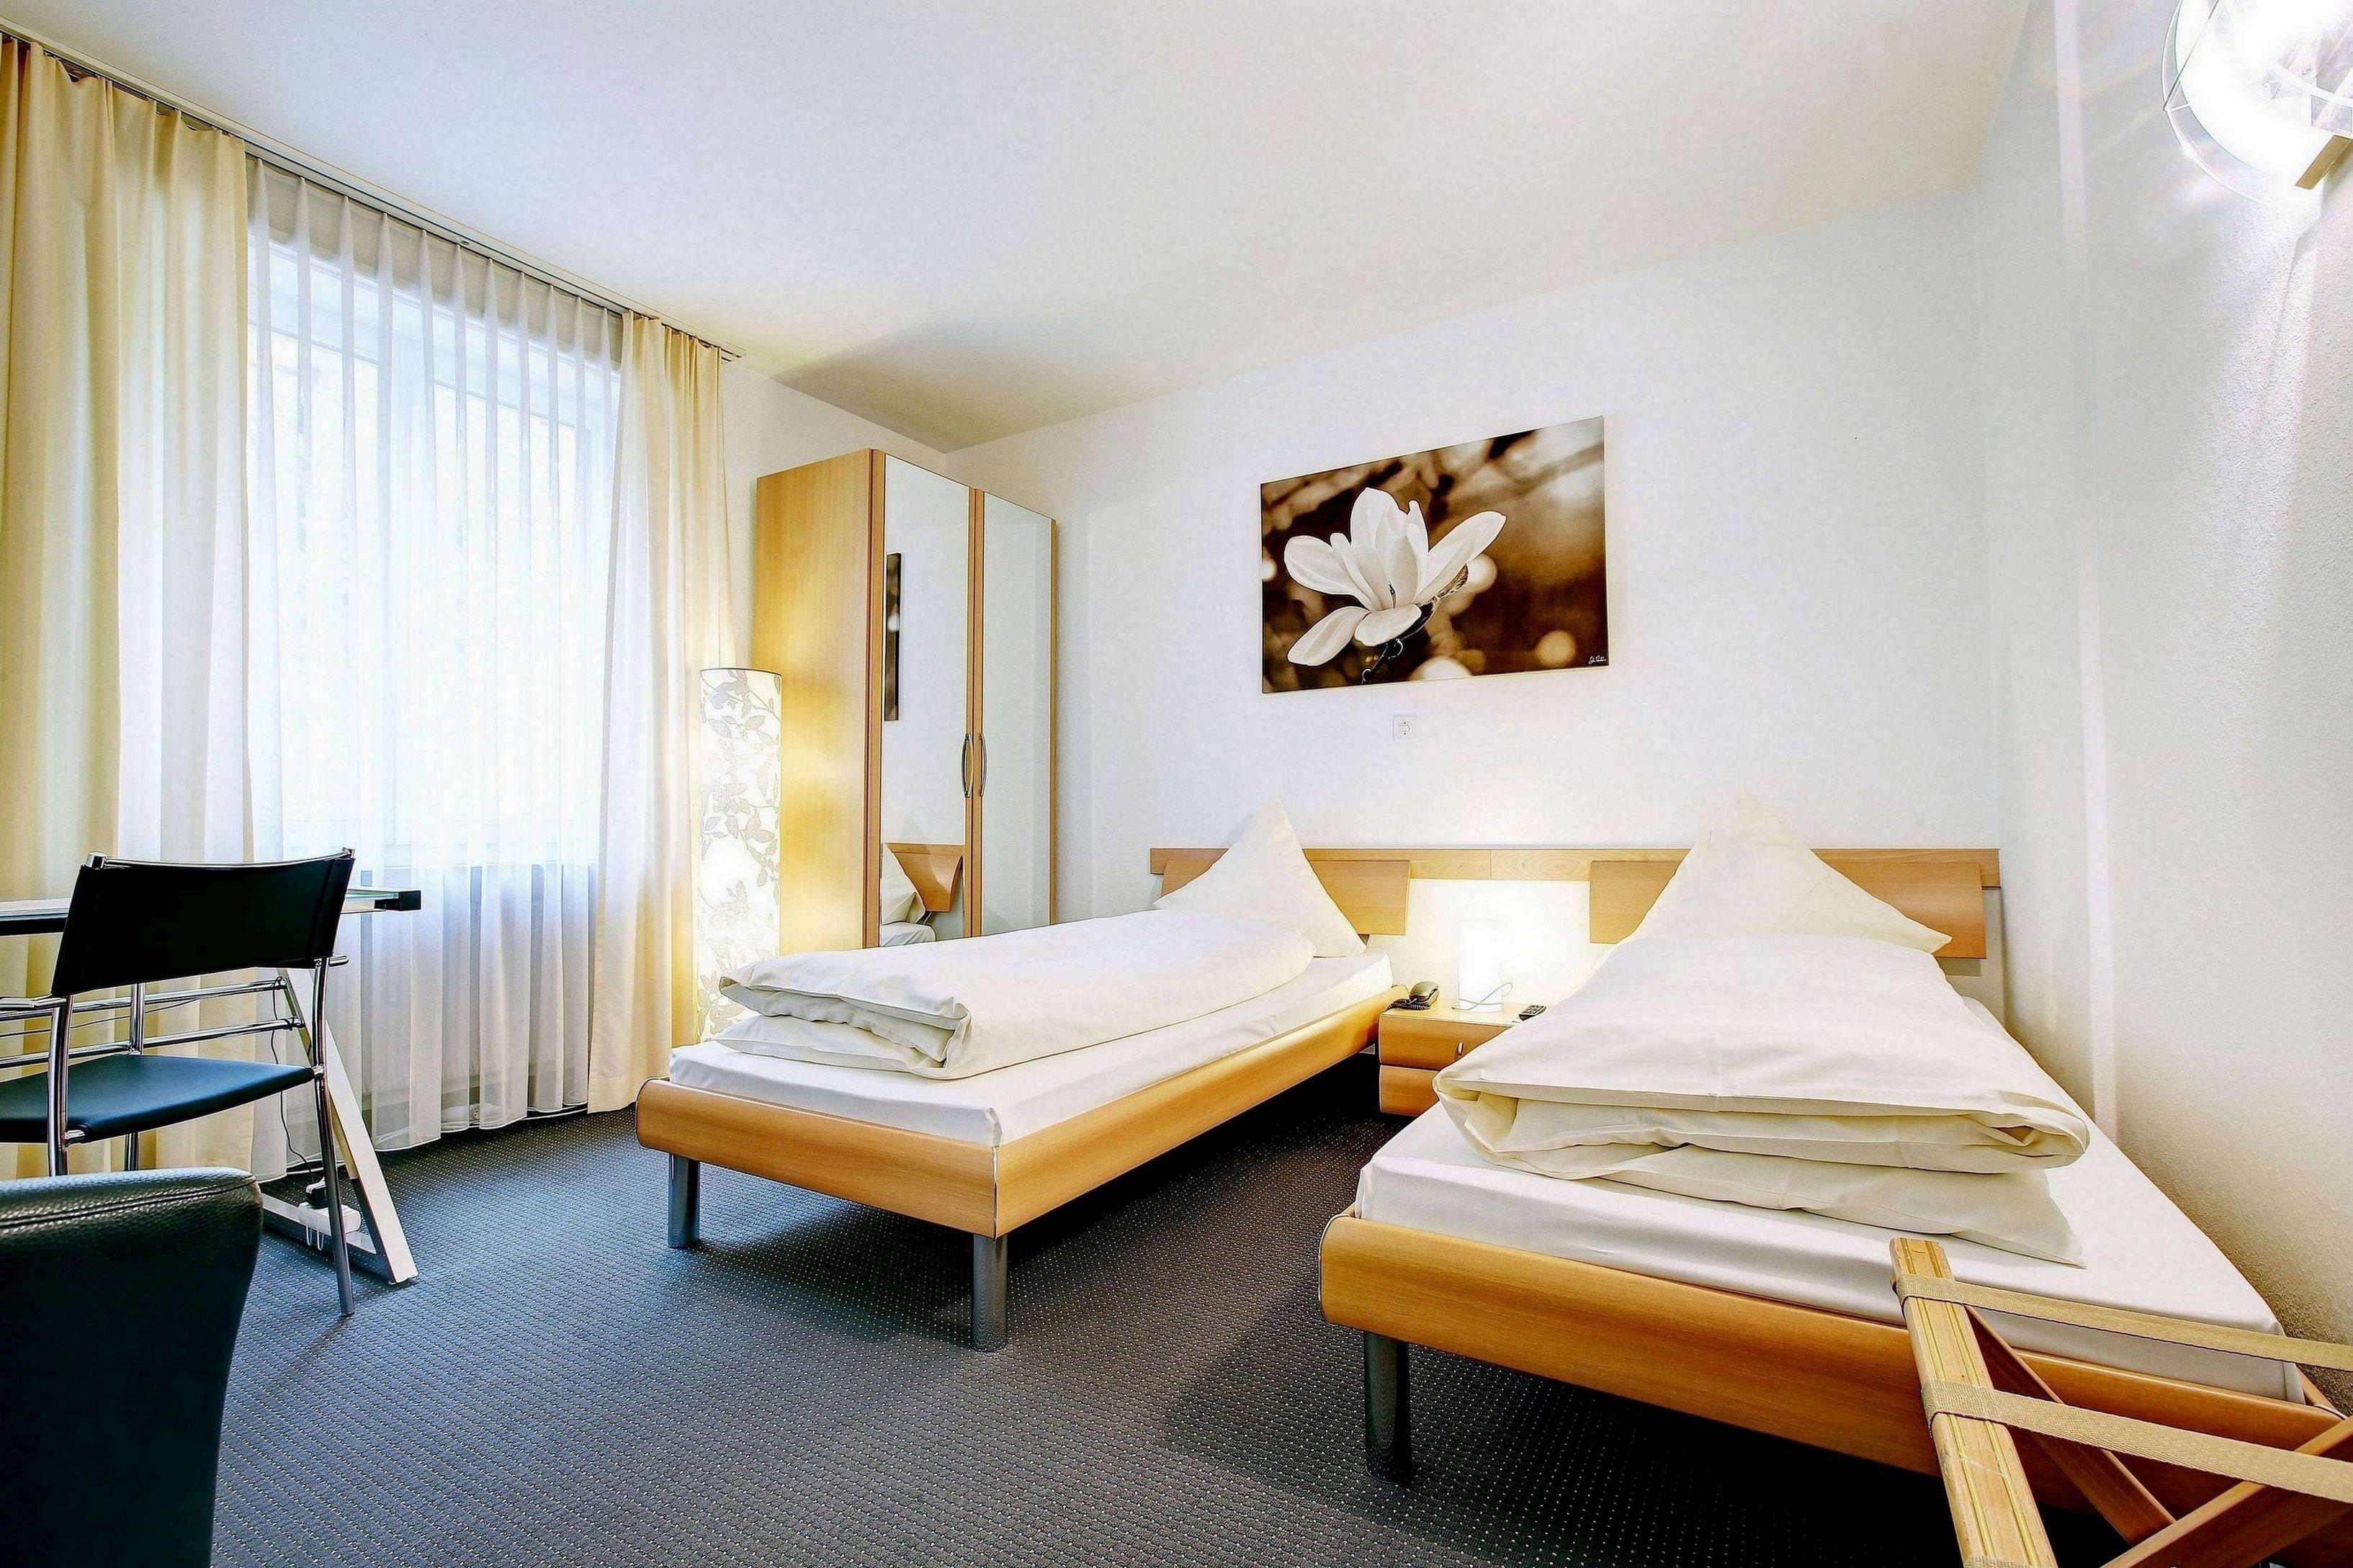 Our twin rooms 22 sqm are equipped with a direct dial telephone, cable TV, a safe, free Wi-Fi and a hairdryer.